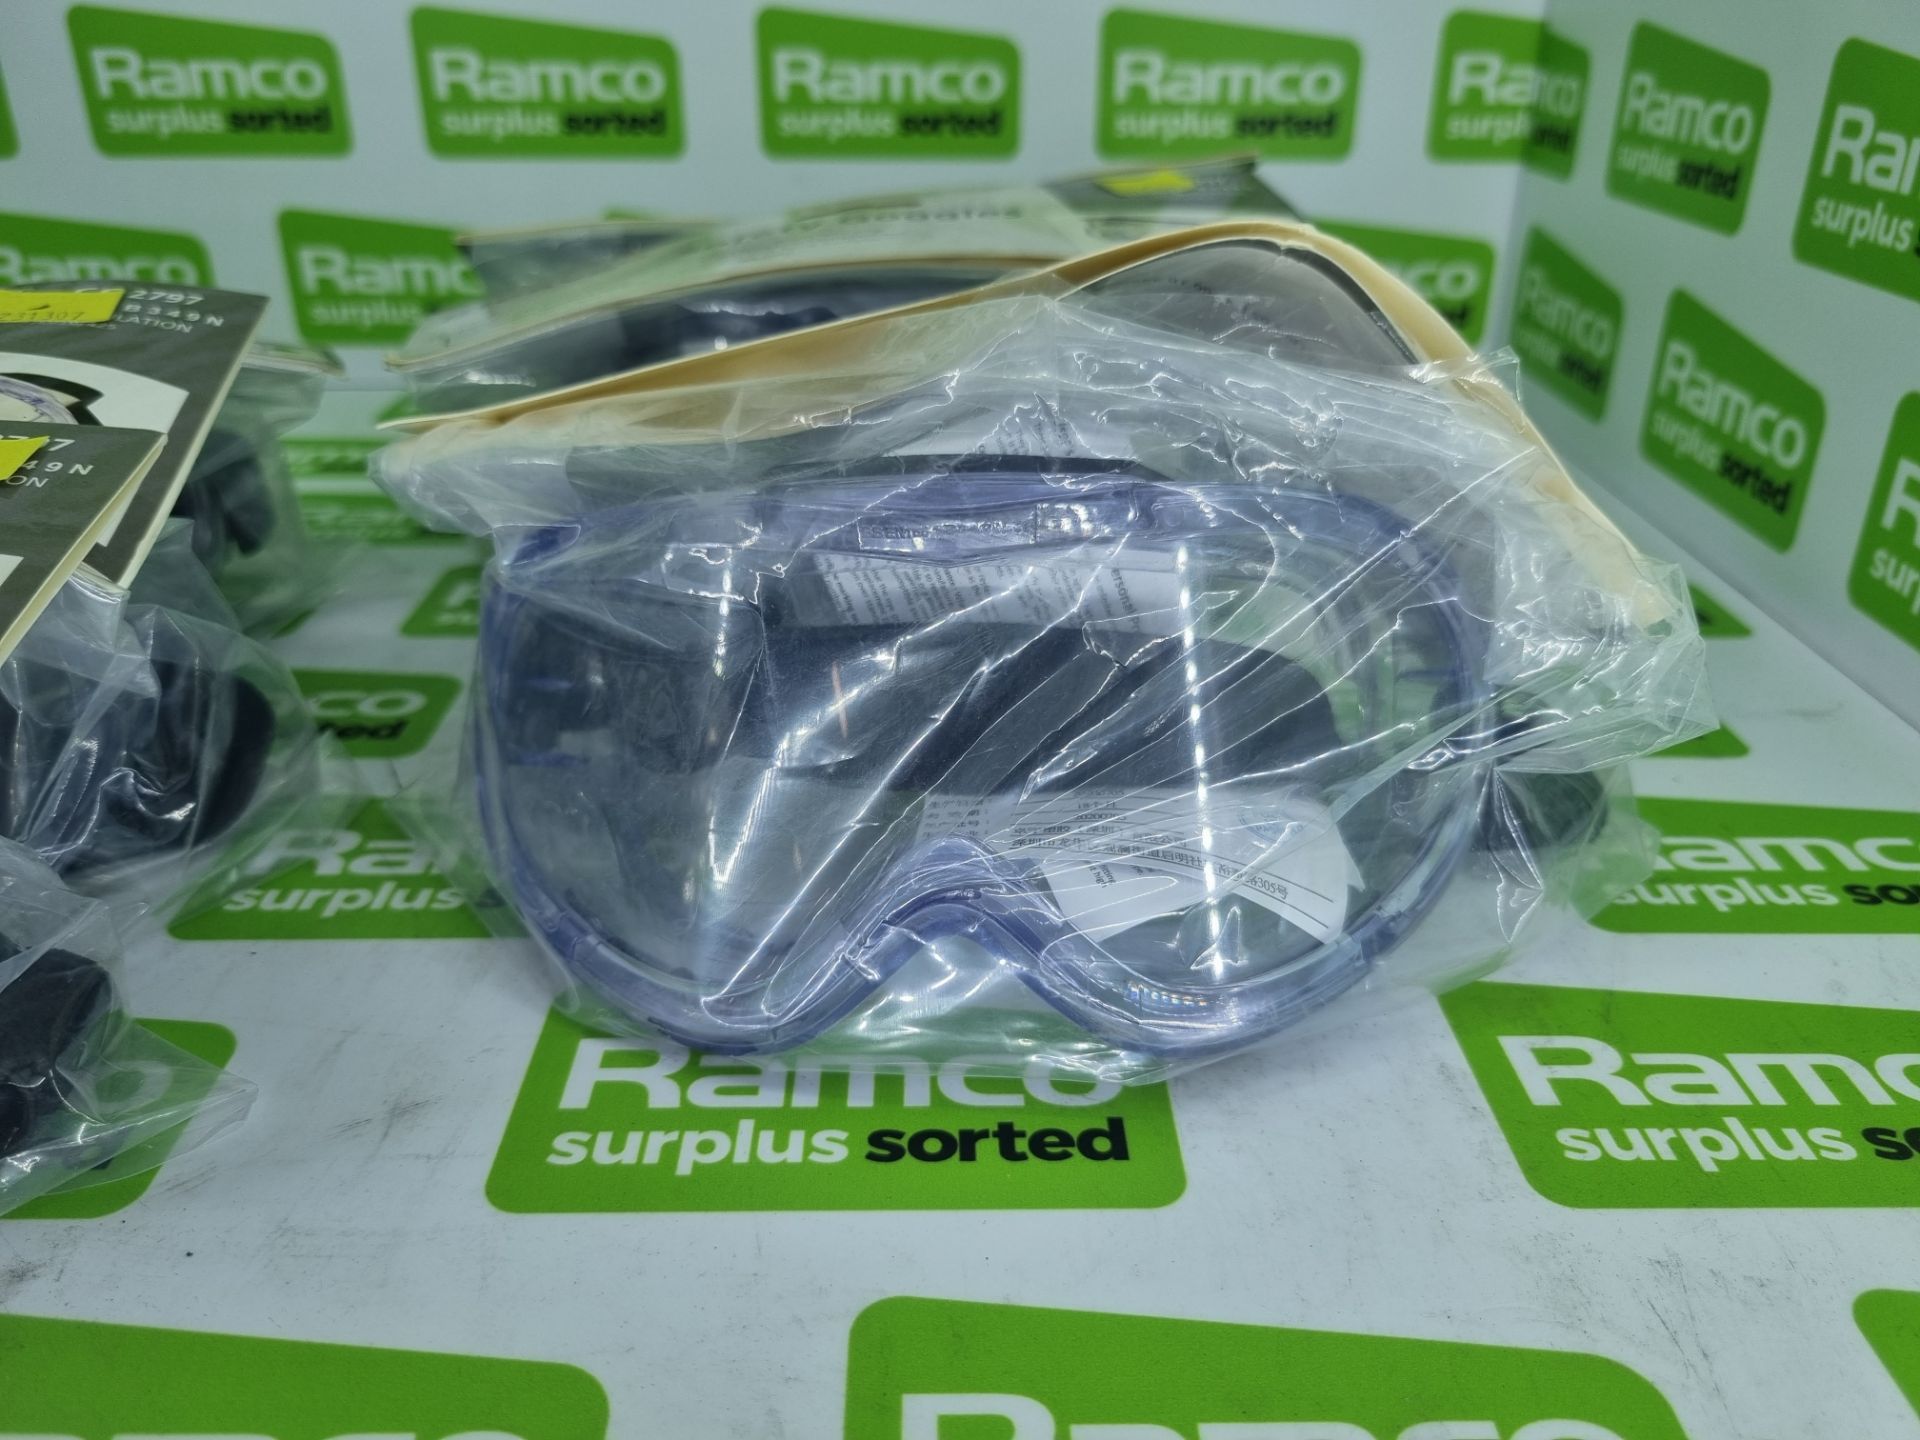 6x Gleave EN166 1 B 3 4 9 N Safety goggles - Image 2 of 2